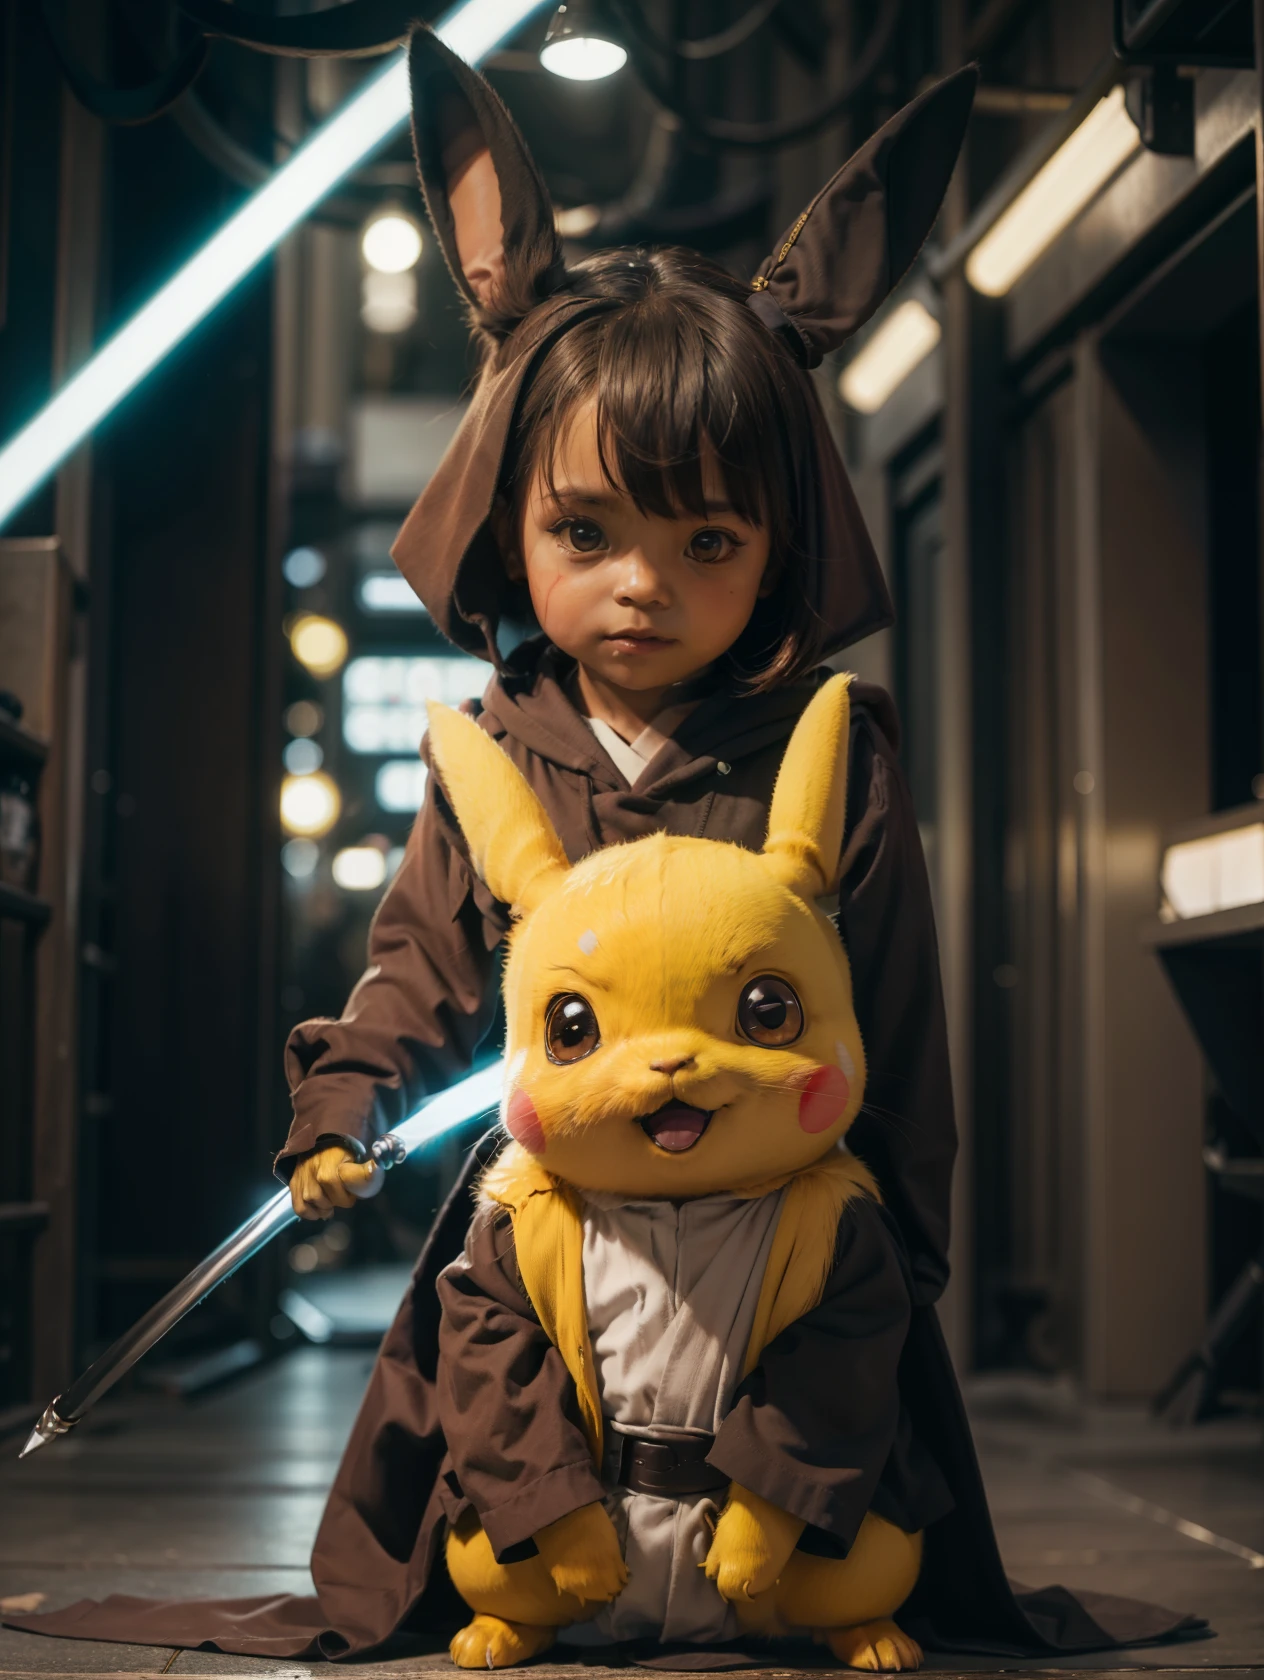 Picachu in black Jedi outfit, holding a yellow lightsaber, background city in ruins